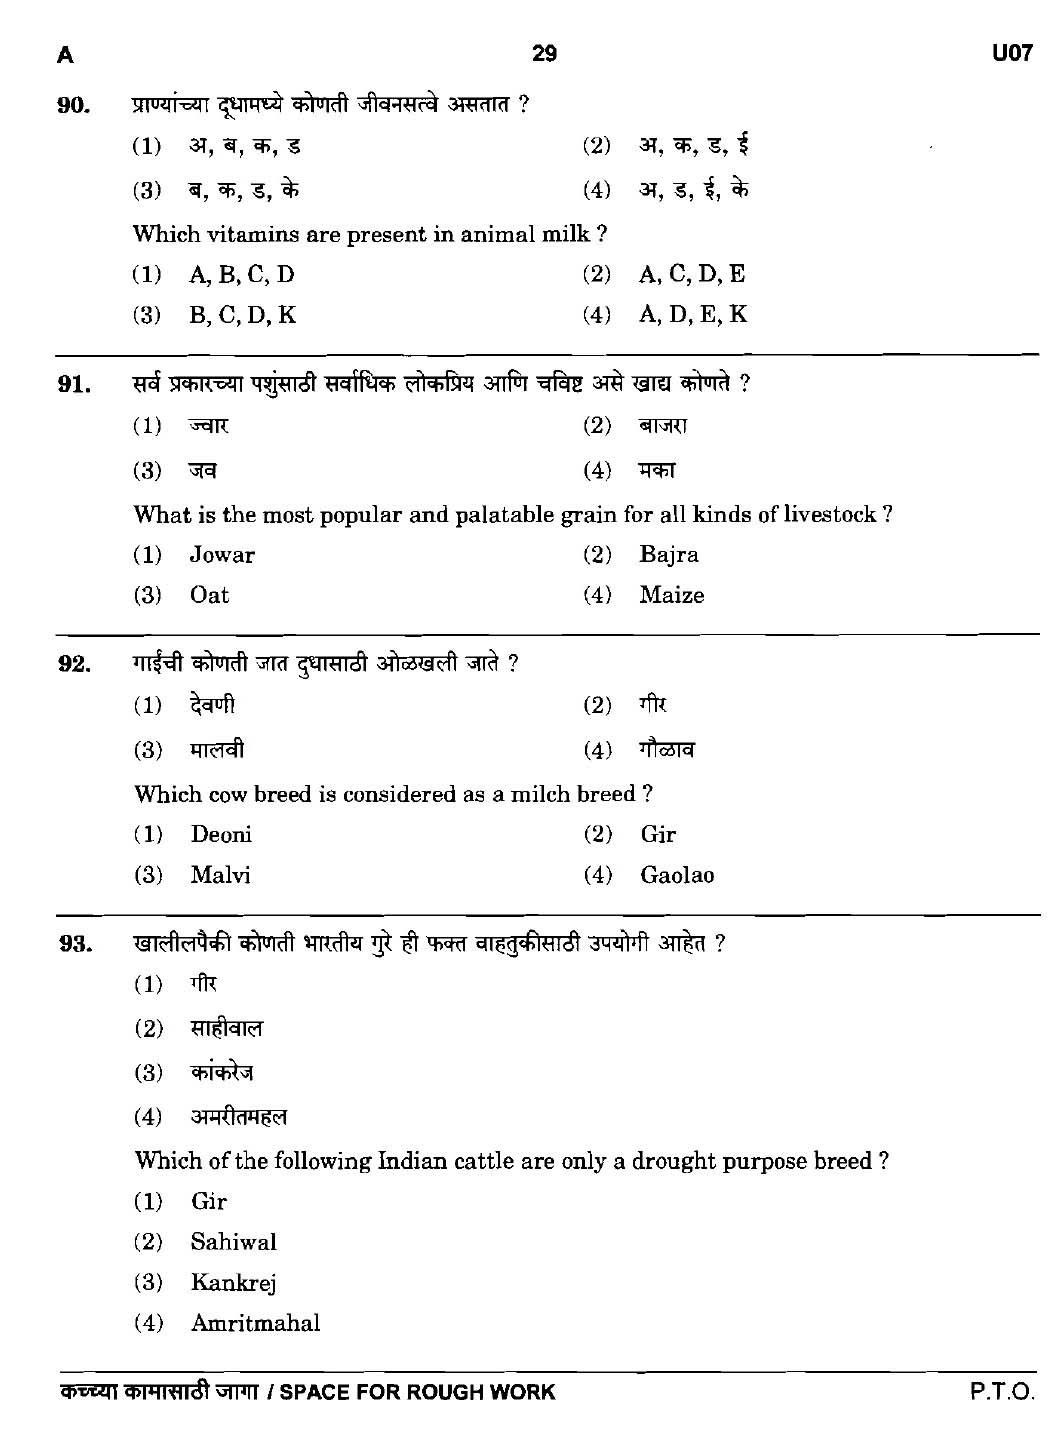 MPSC Agricultural Services Preliminary Exam 2016 Question Paper 28